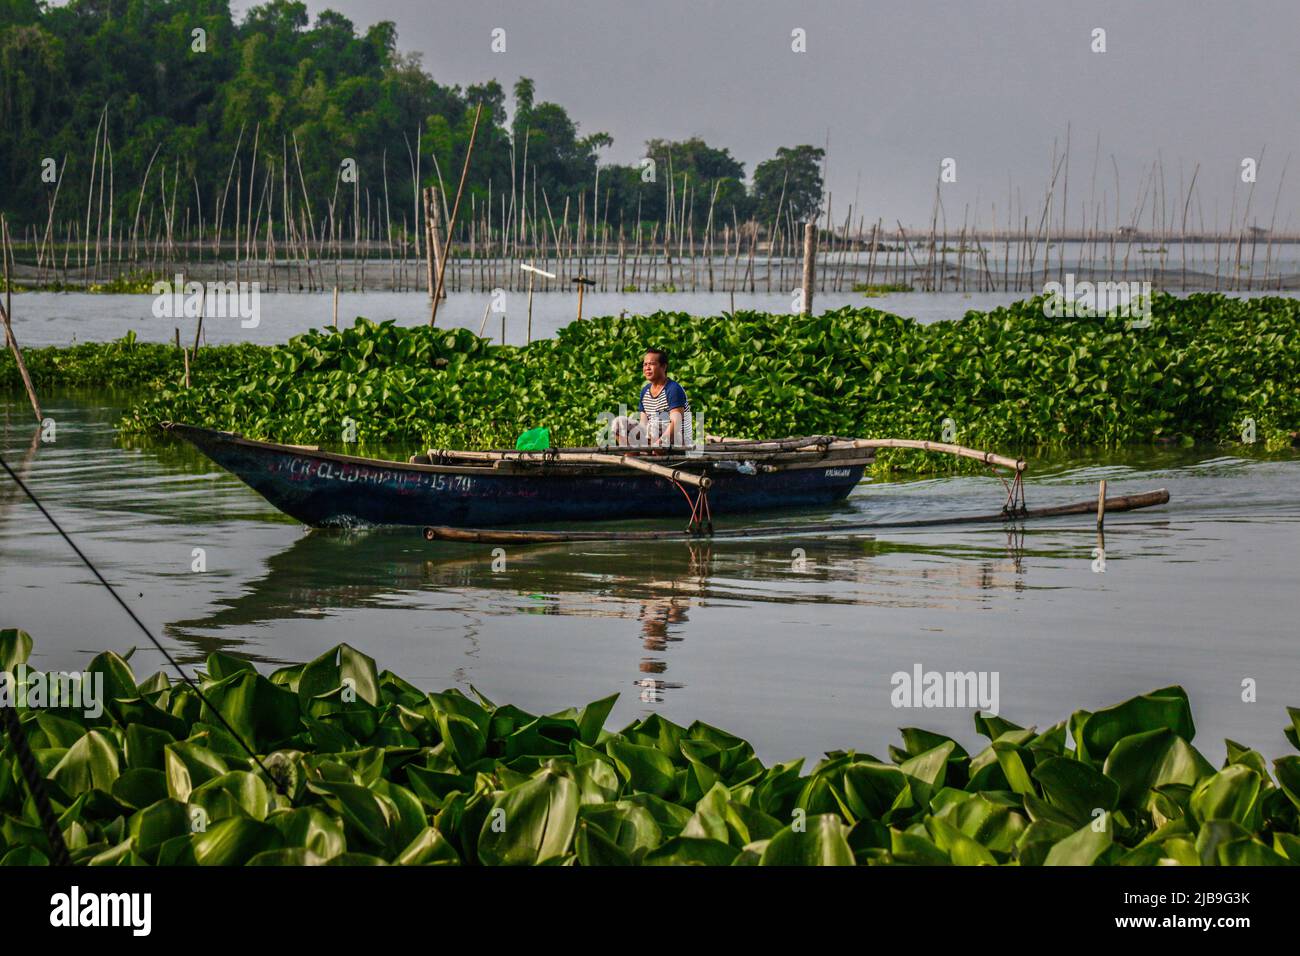 Binangonan, Philippines. 04th June, 2022. A fisherman rows his small boat between floating water hyacinths. Laguna Lake is the largest lake in the Philippines, covering a surface of 900 square kilometers or equivalent to 90,000 hectares. Its water runs from Laguna Province all the way to the Province of Rizal, the southern part of Luzon. The lake provides resources like transportation, recreation, livelihood, and most importantly food for the surrounding communities. Laguna Lake is classified as Class C freshwater which has the capability to grow fish and other aquatic resources. Some watershe Stock Photo